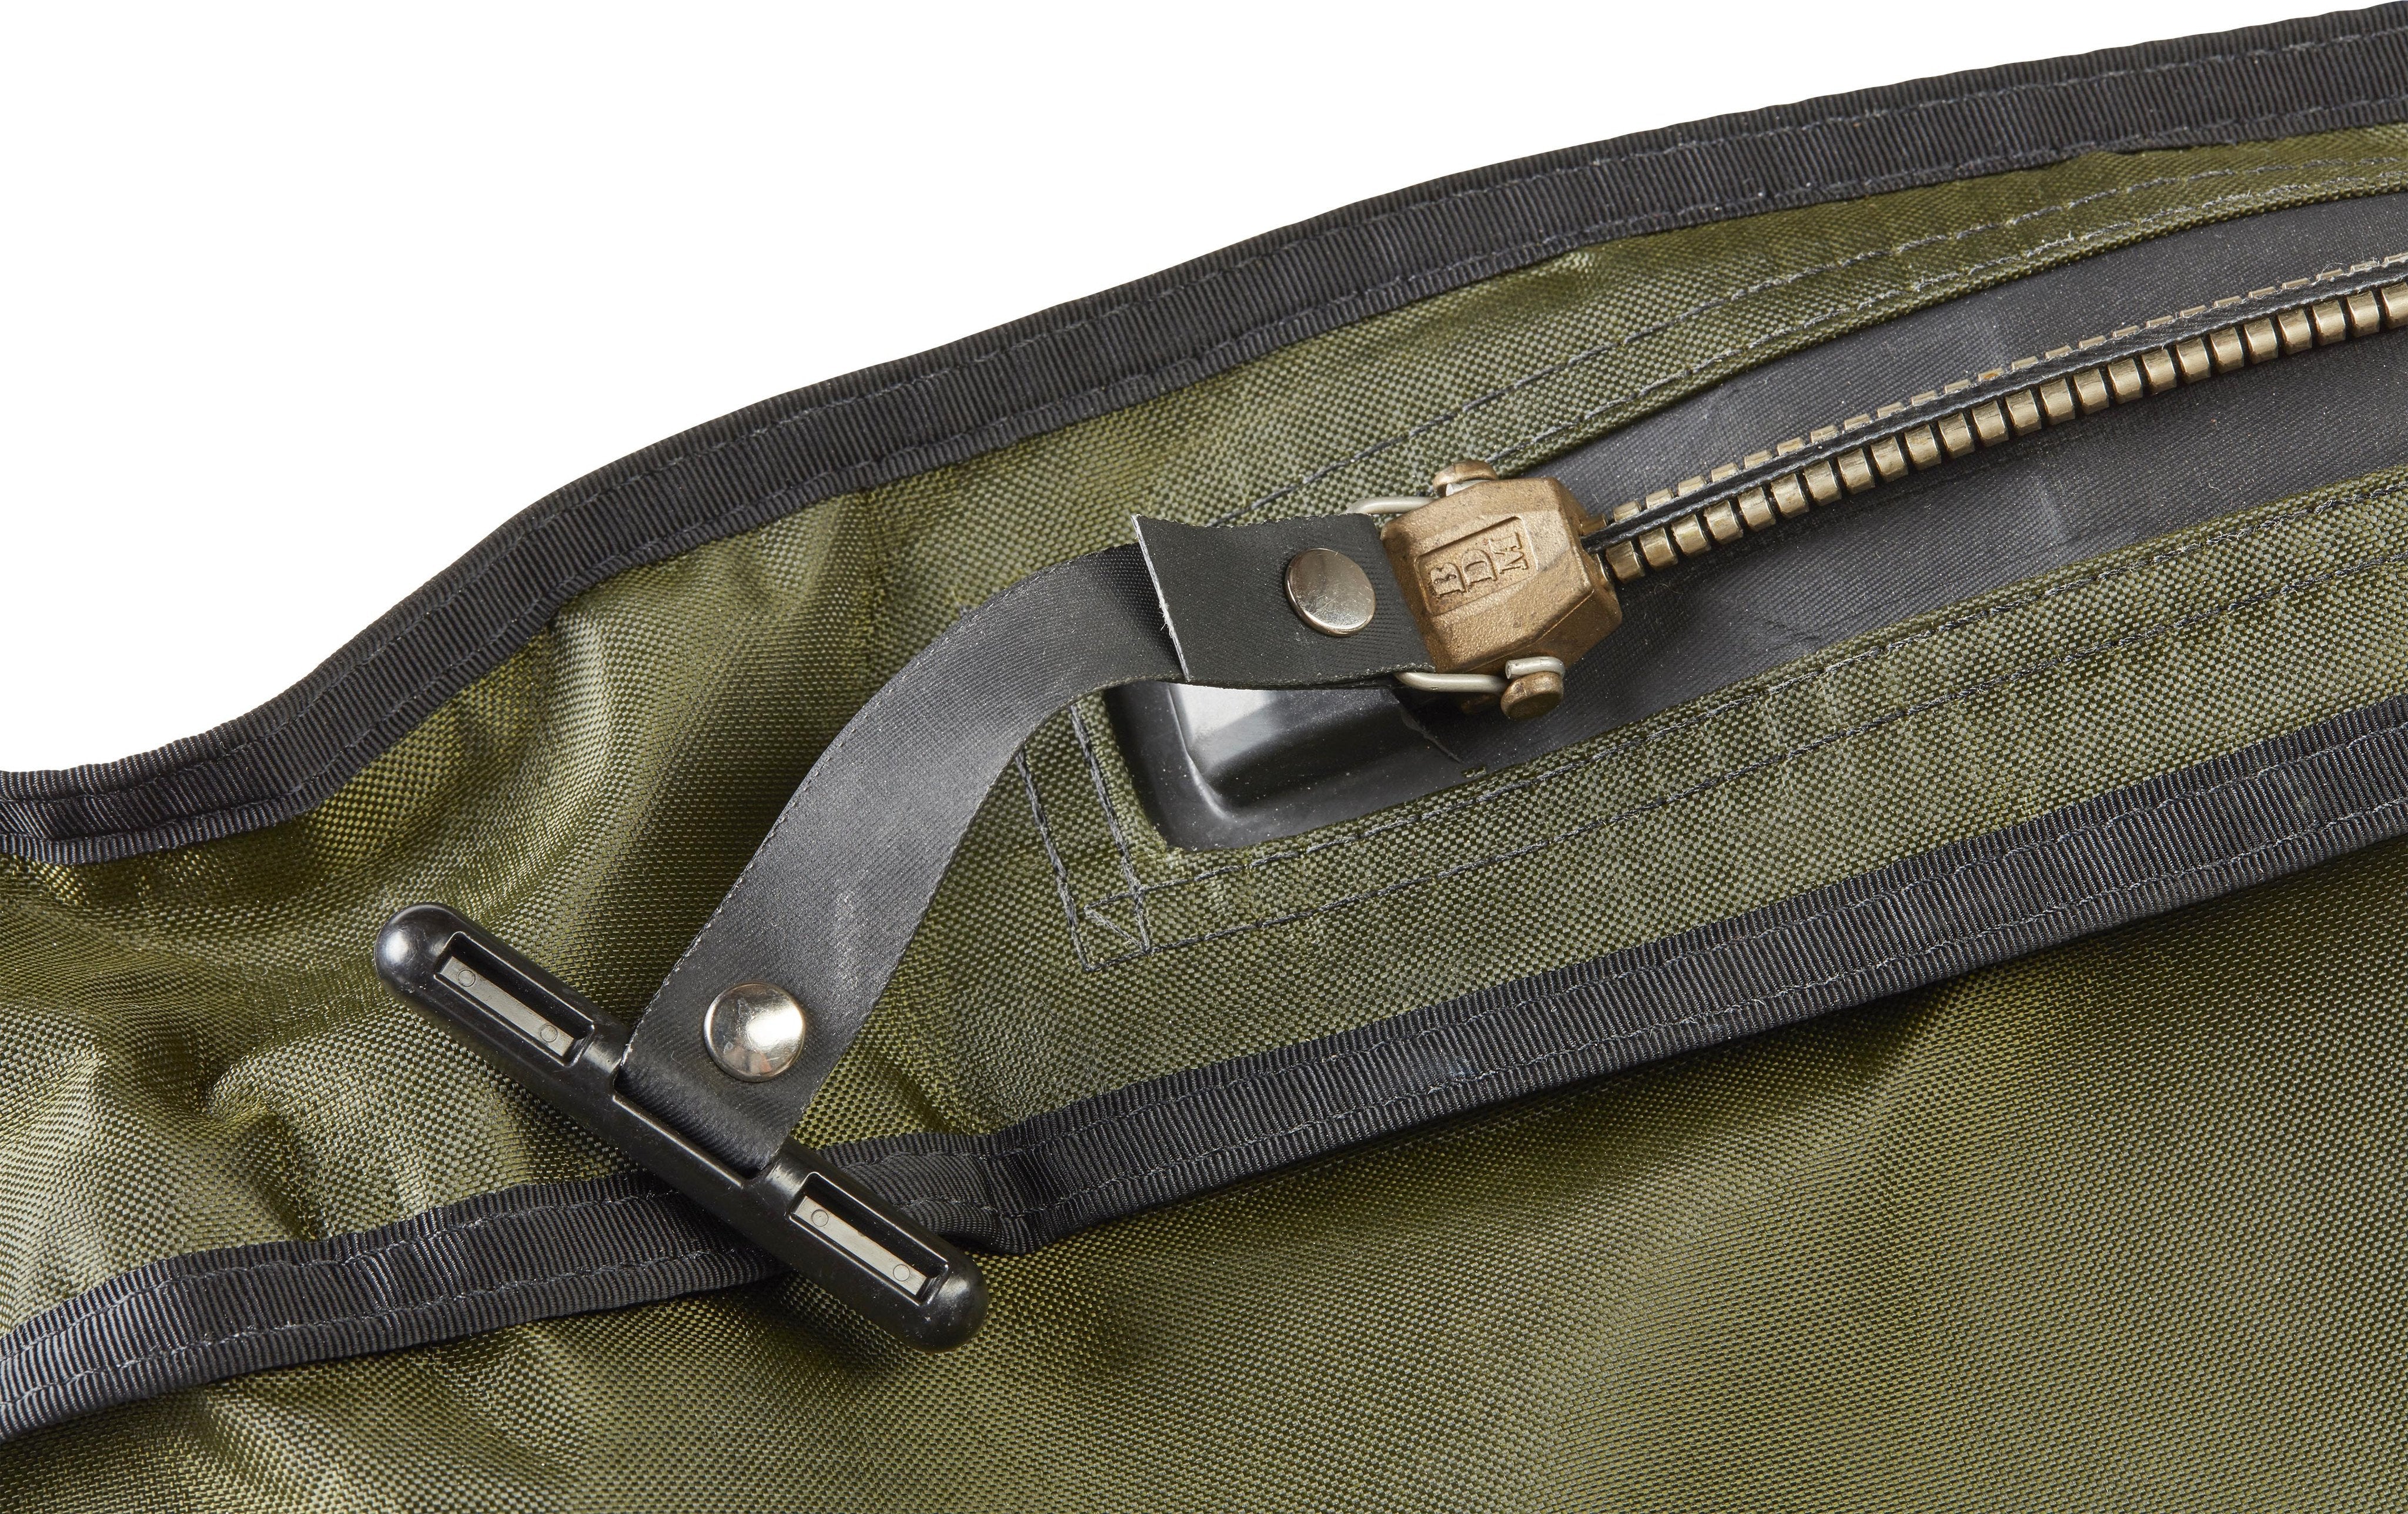 Large or Small Weapons Shoot Through Reusable Waterproof Bag